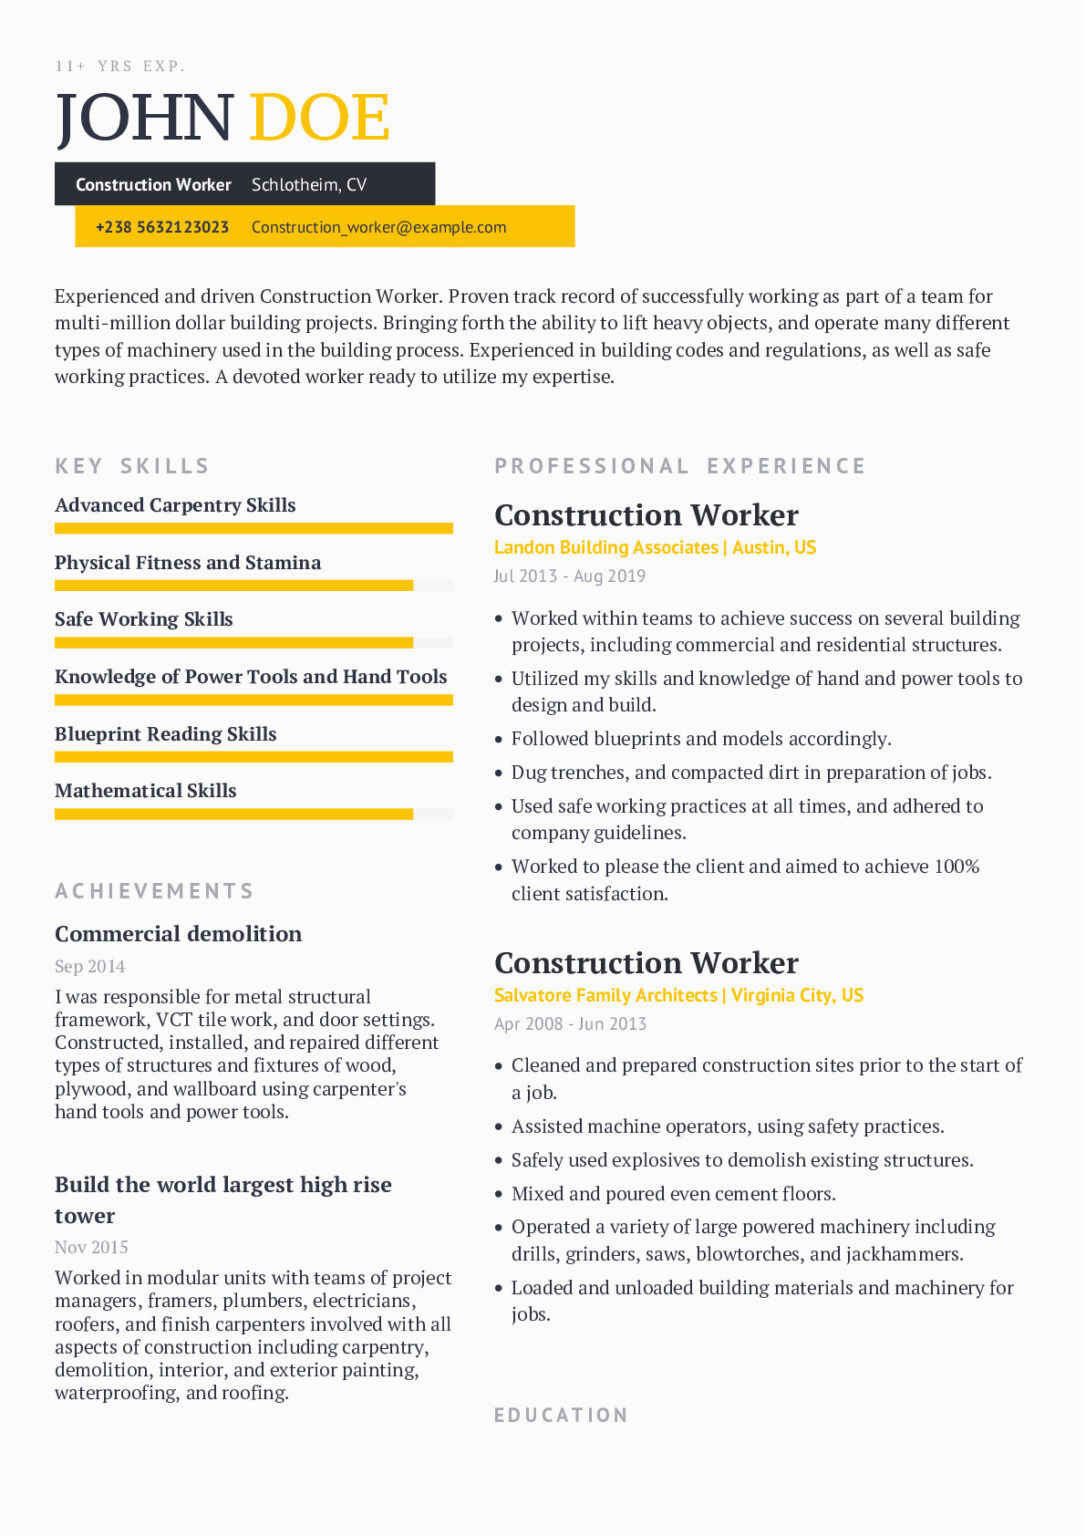 Free Resume Templates for Construction Workers 20 Construction Worker Resume Sample Free Resume